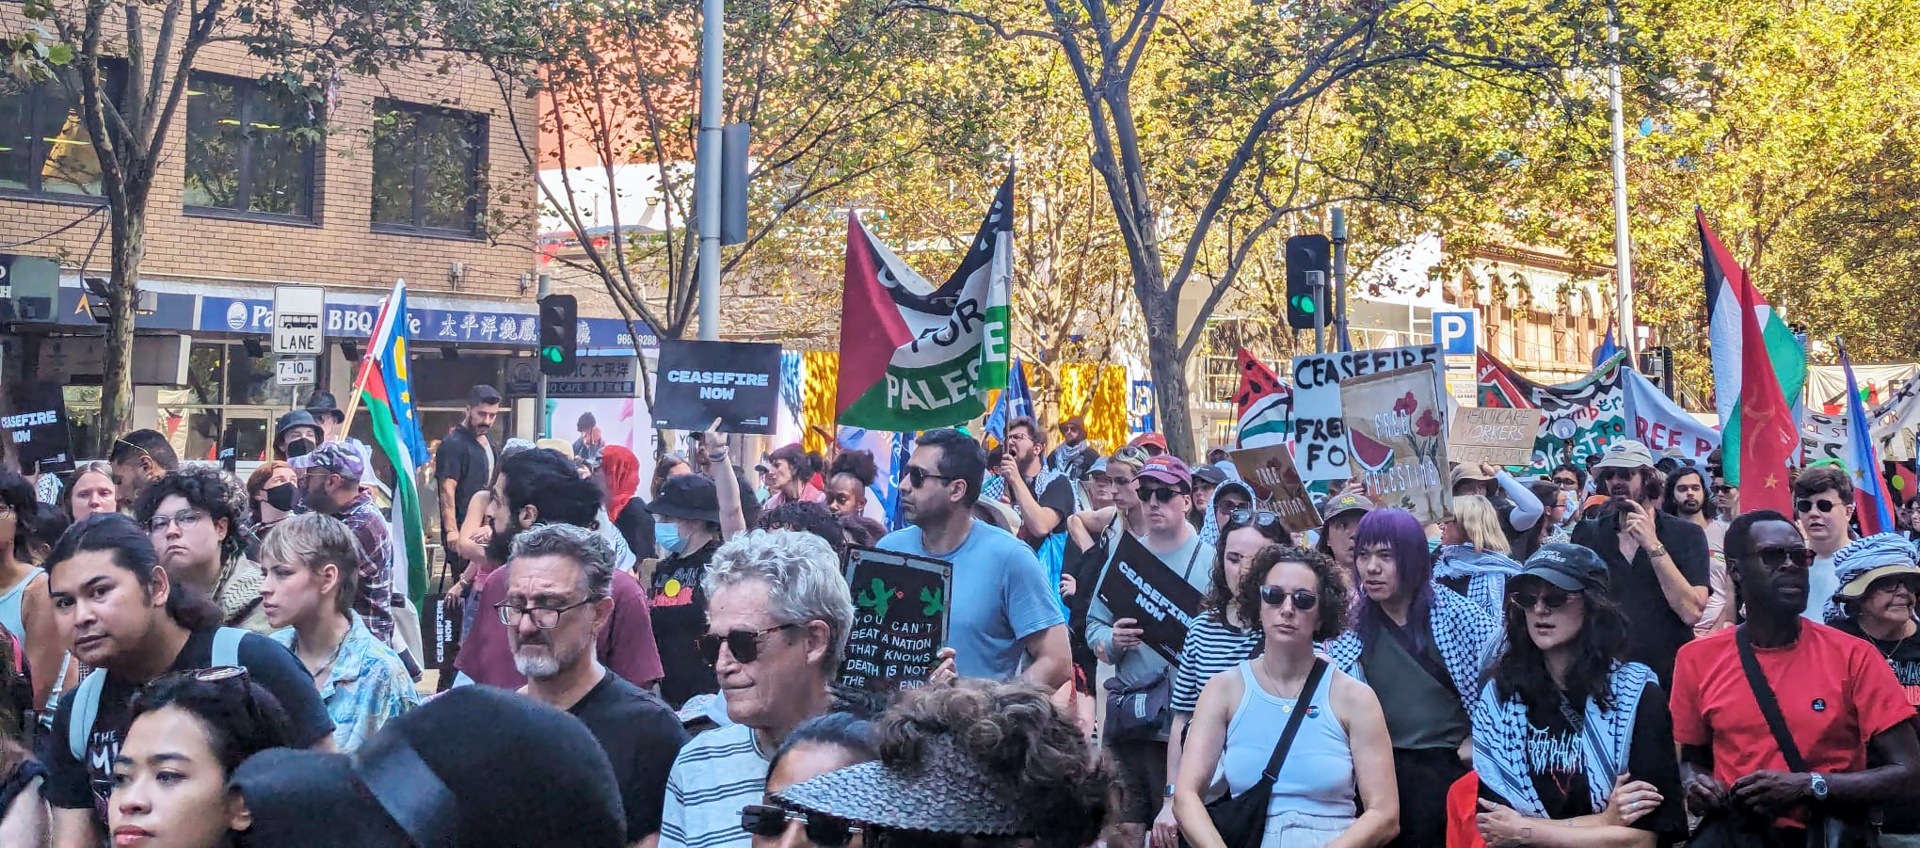 Naarm/Melbourne protest, March 17